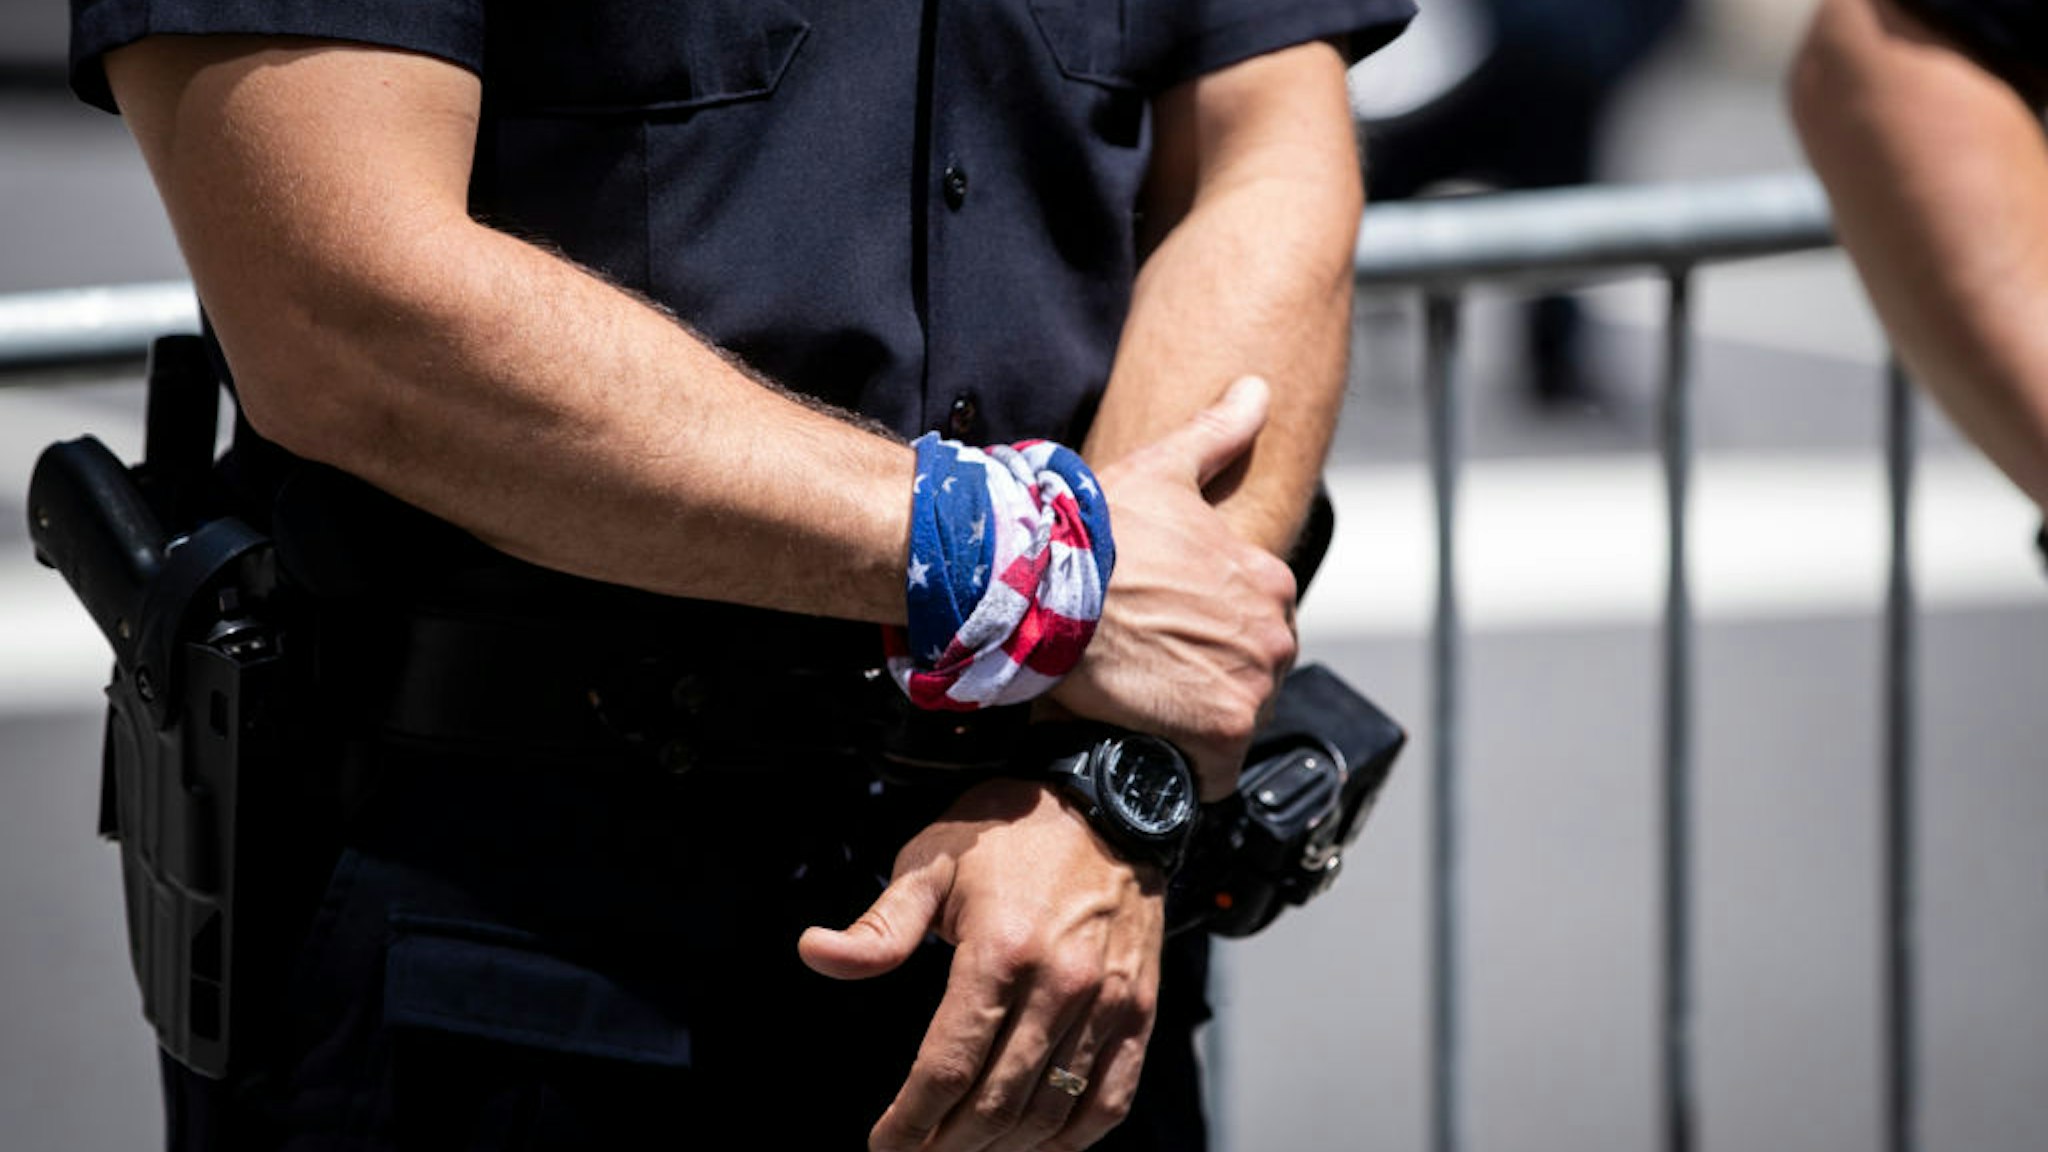 MANHATTAN, NY - JUNE 12: A NYPD officer wears a bandana around his wrist that is of the American flag with his gun at his side stands at the ready to stop any protesters that try to cross the barricade toward Trump Tower cards parked outside of Trump Tower and police officers sand out front in protection against protesters. This was part of the Black Womxn's Empowerment March that started at Trump Tower and marched to Gracie Mansion. Protesters continue taking to the streets across America and around the world after the killing of George Floyd at the hands of a white police officer Derek Chauvin that was kneeling on his neck during for eight minutes, was caught on video and went viral. During his arrest as Floyd pleaded, "I Can't Breathe". The protest are attempting to give a voice to the need for human rights for African American's and to stop police brutality against people of color. They are also protesting deep-seated racism in America. Many people were wearing masks and observing social distancing due to the coronavirus pandemic. Photographed in the Manhattan Borough of New York on June 12, 2020, USA. (Photo by Ira L. Black/Corbis via Getty Images)